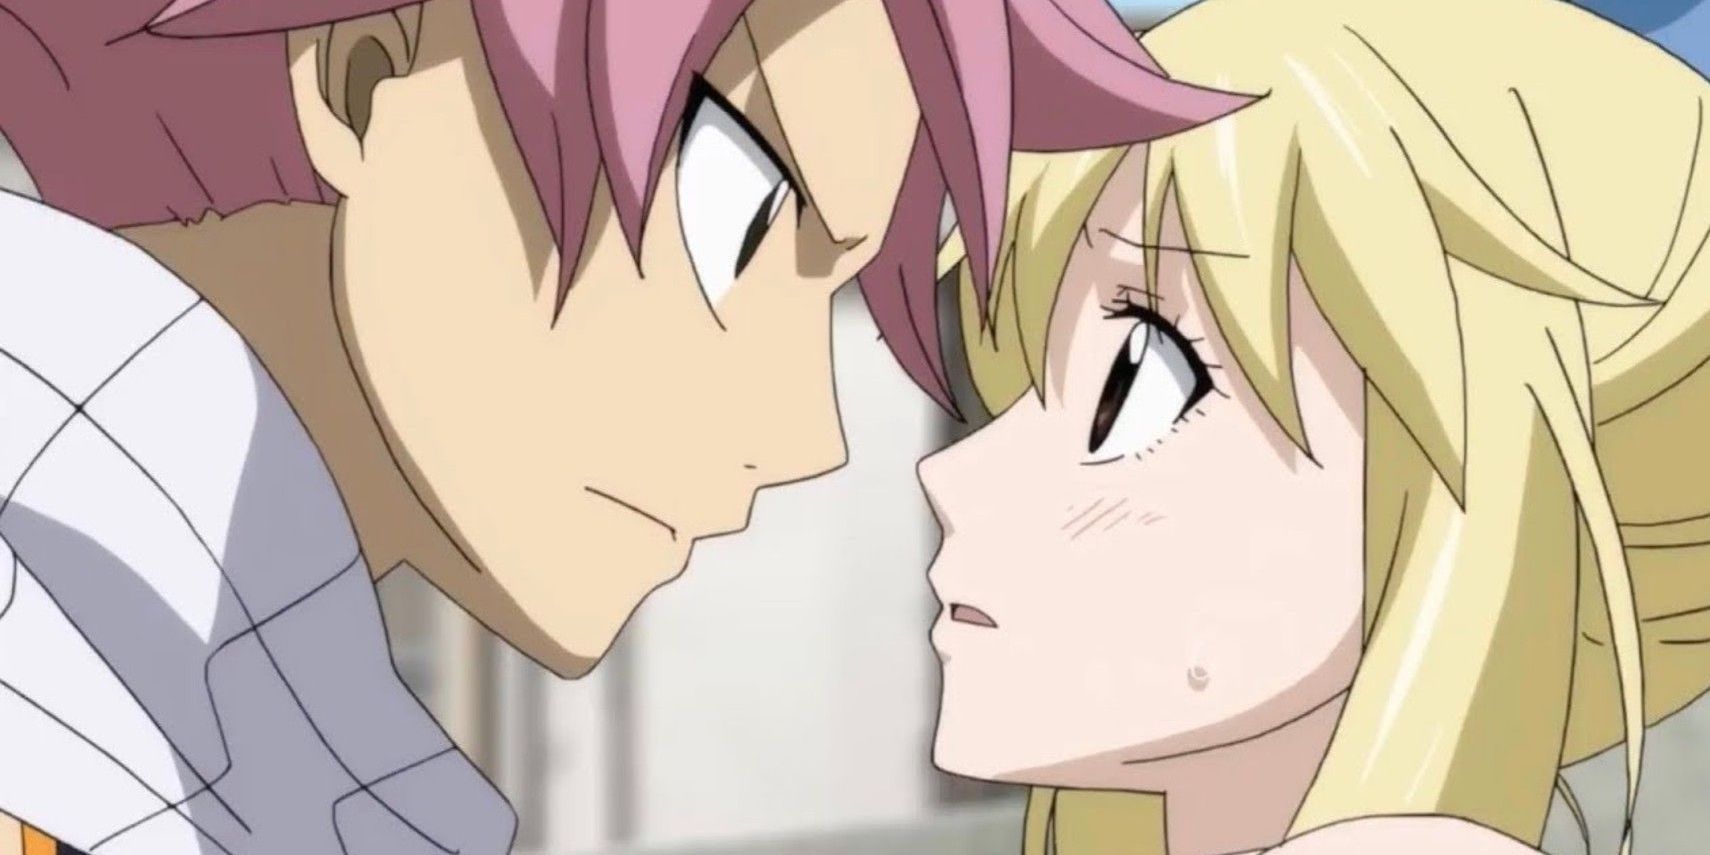 Natsu and Lucy in Fairy Tail